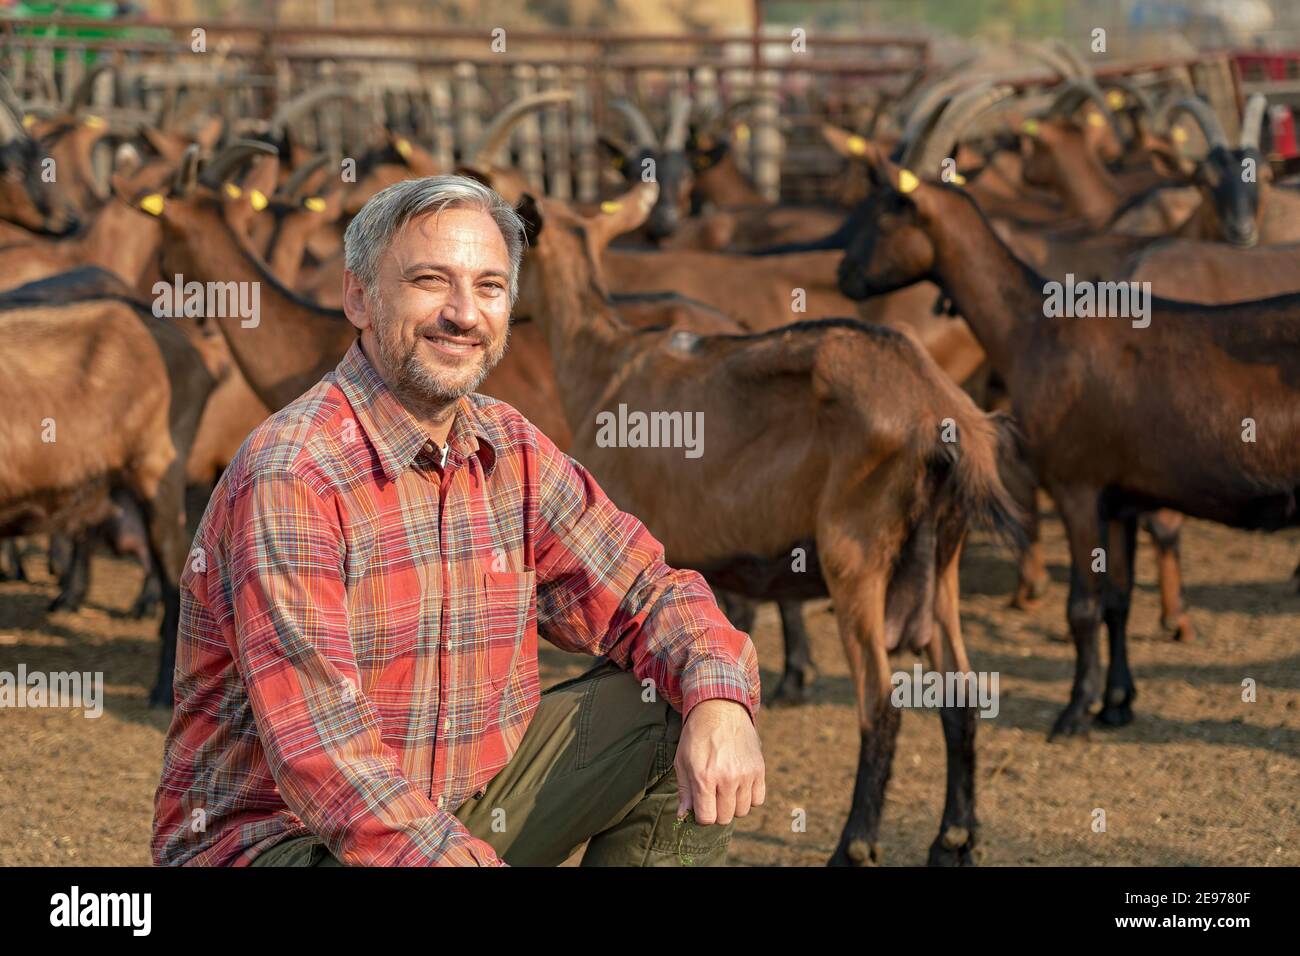 Smiling Mature Farmer and Goats in an Outdoor Animal Enclosure on a Sunny Day. Animal Husbandry Concept. Stock Photo